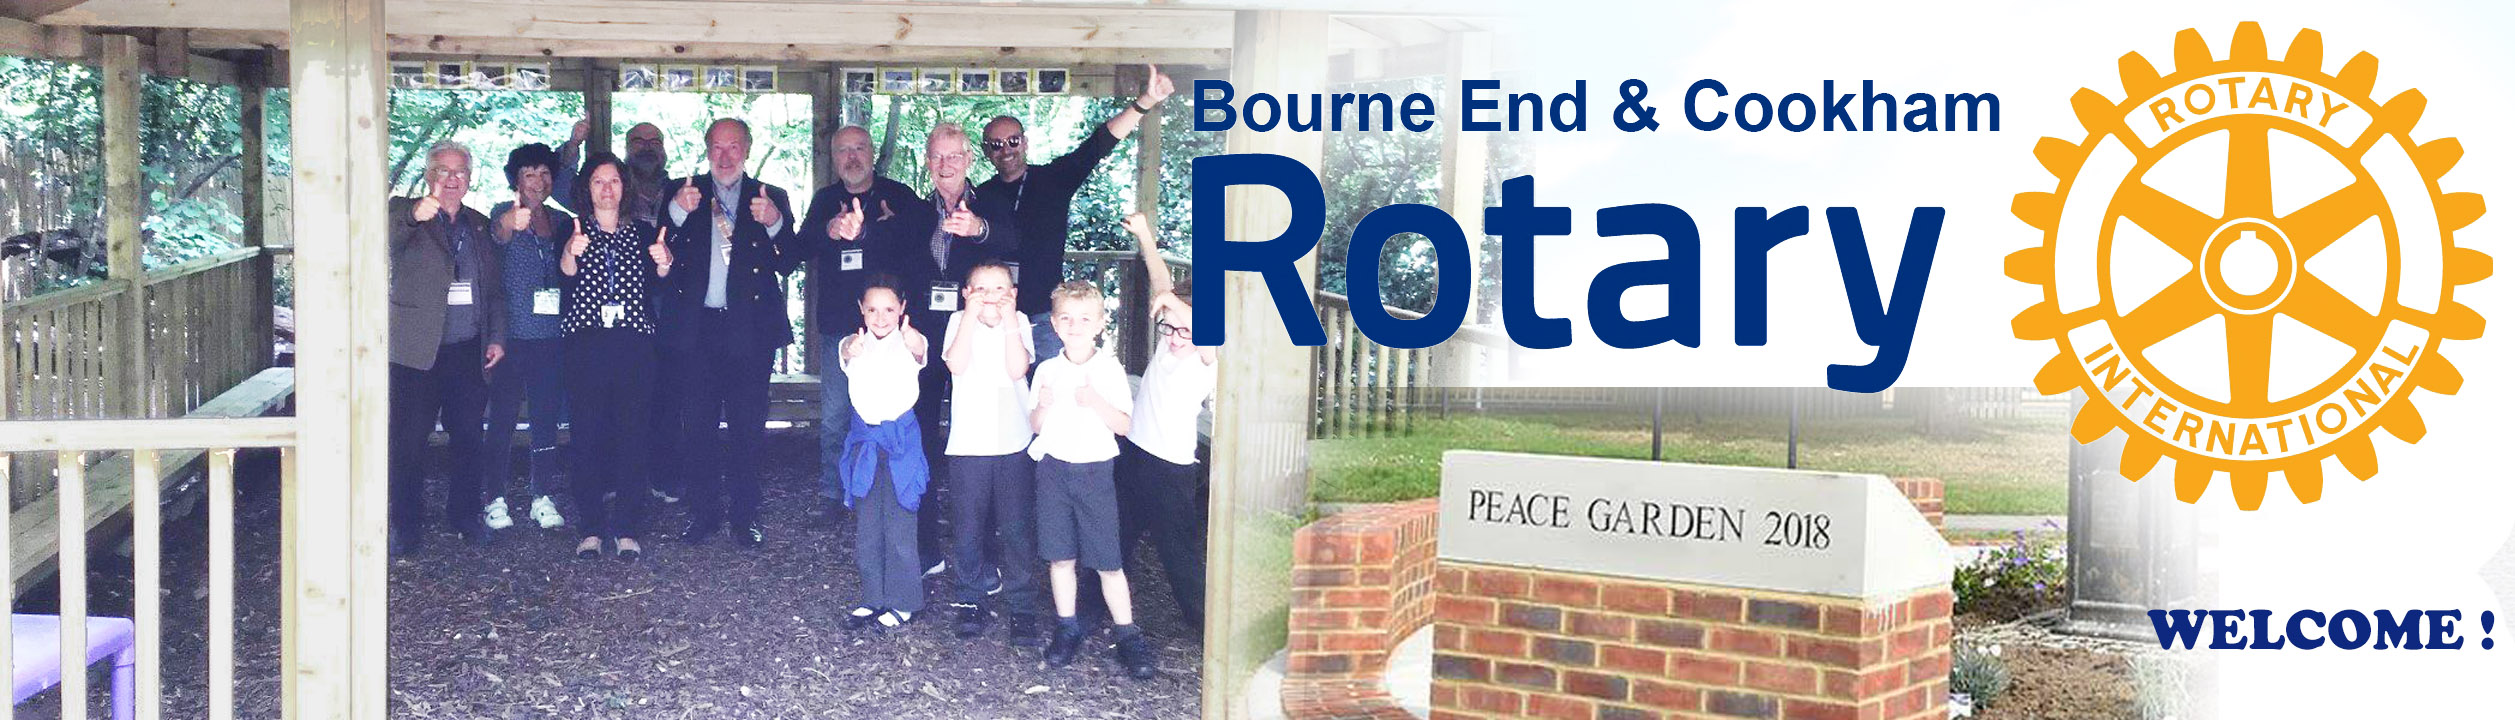 The Rotary Club of Bourne End and Cookham